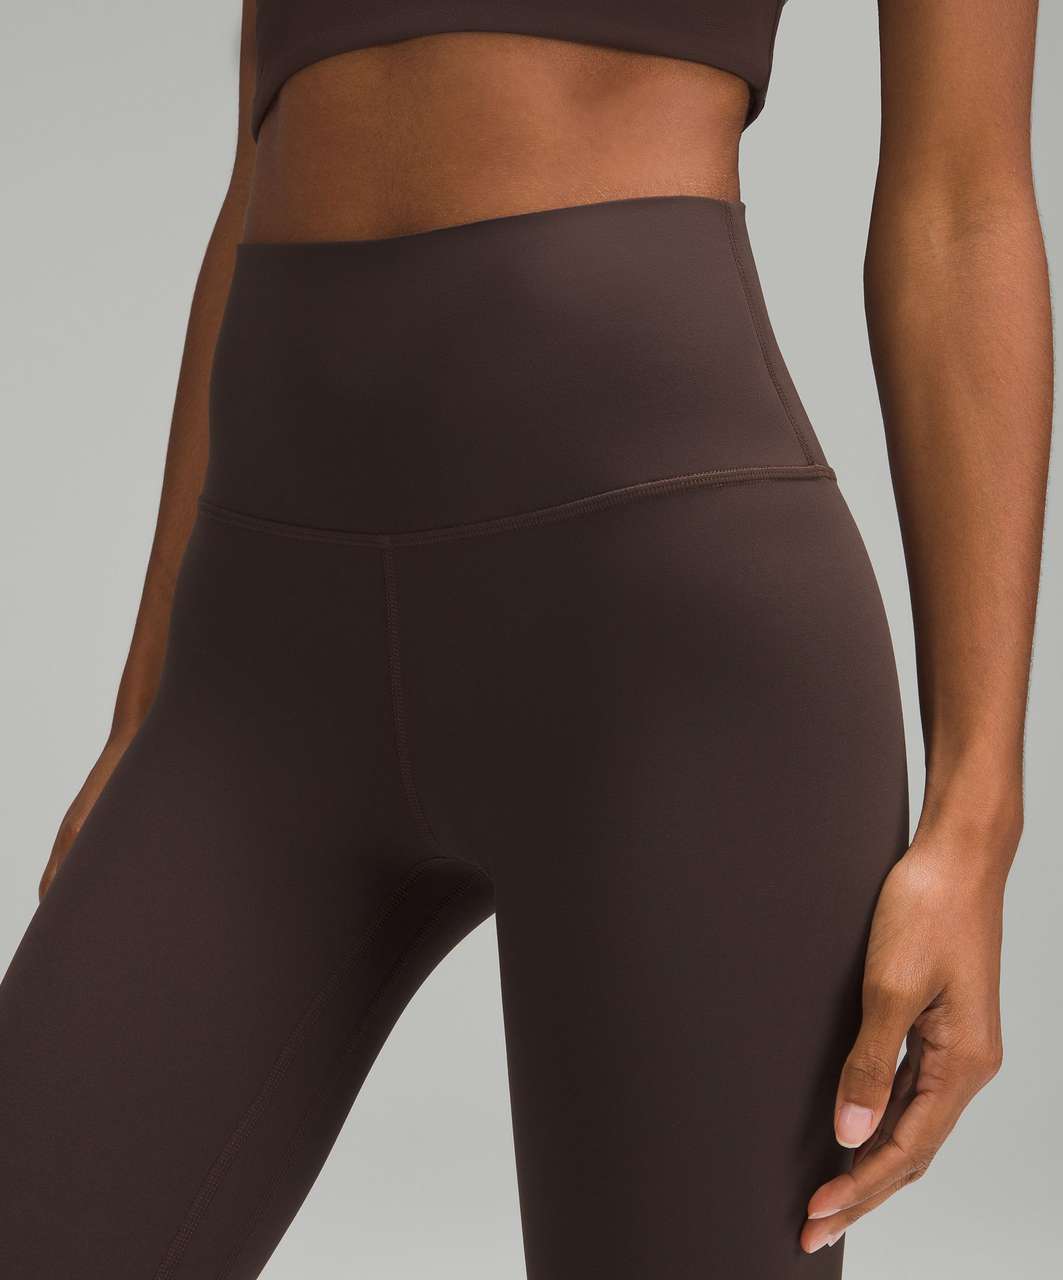 Lululemon Align High-Rise Pant 28 - Espresso (First Release